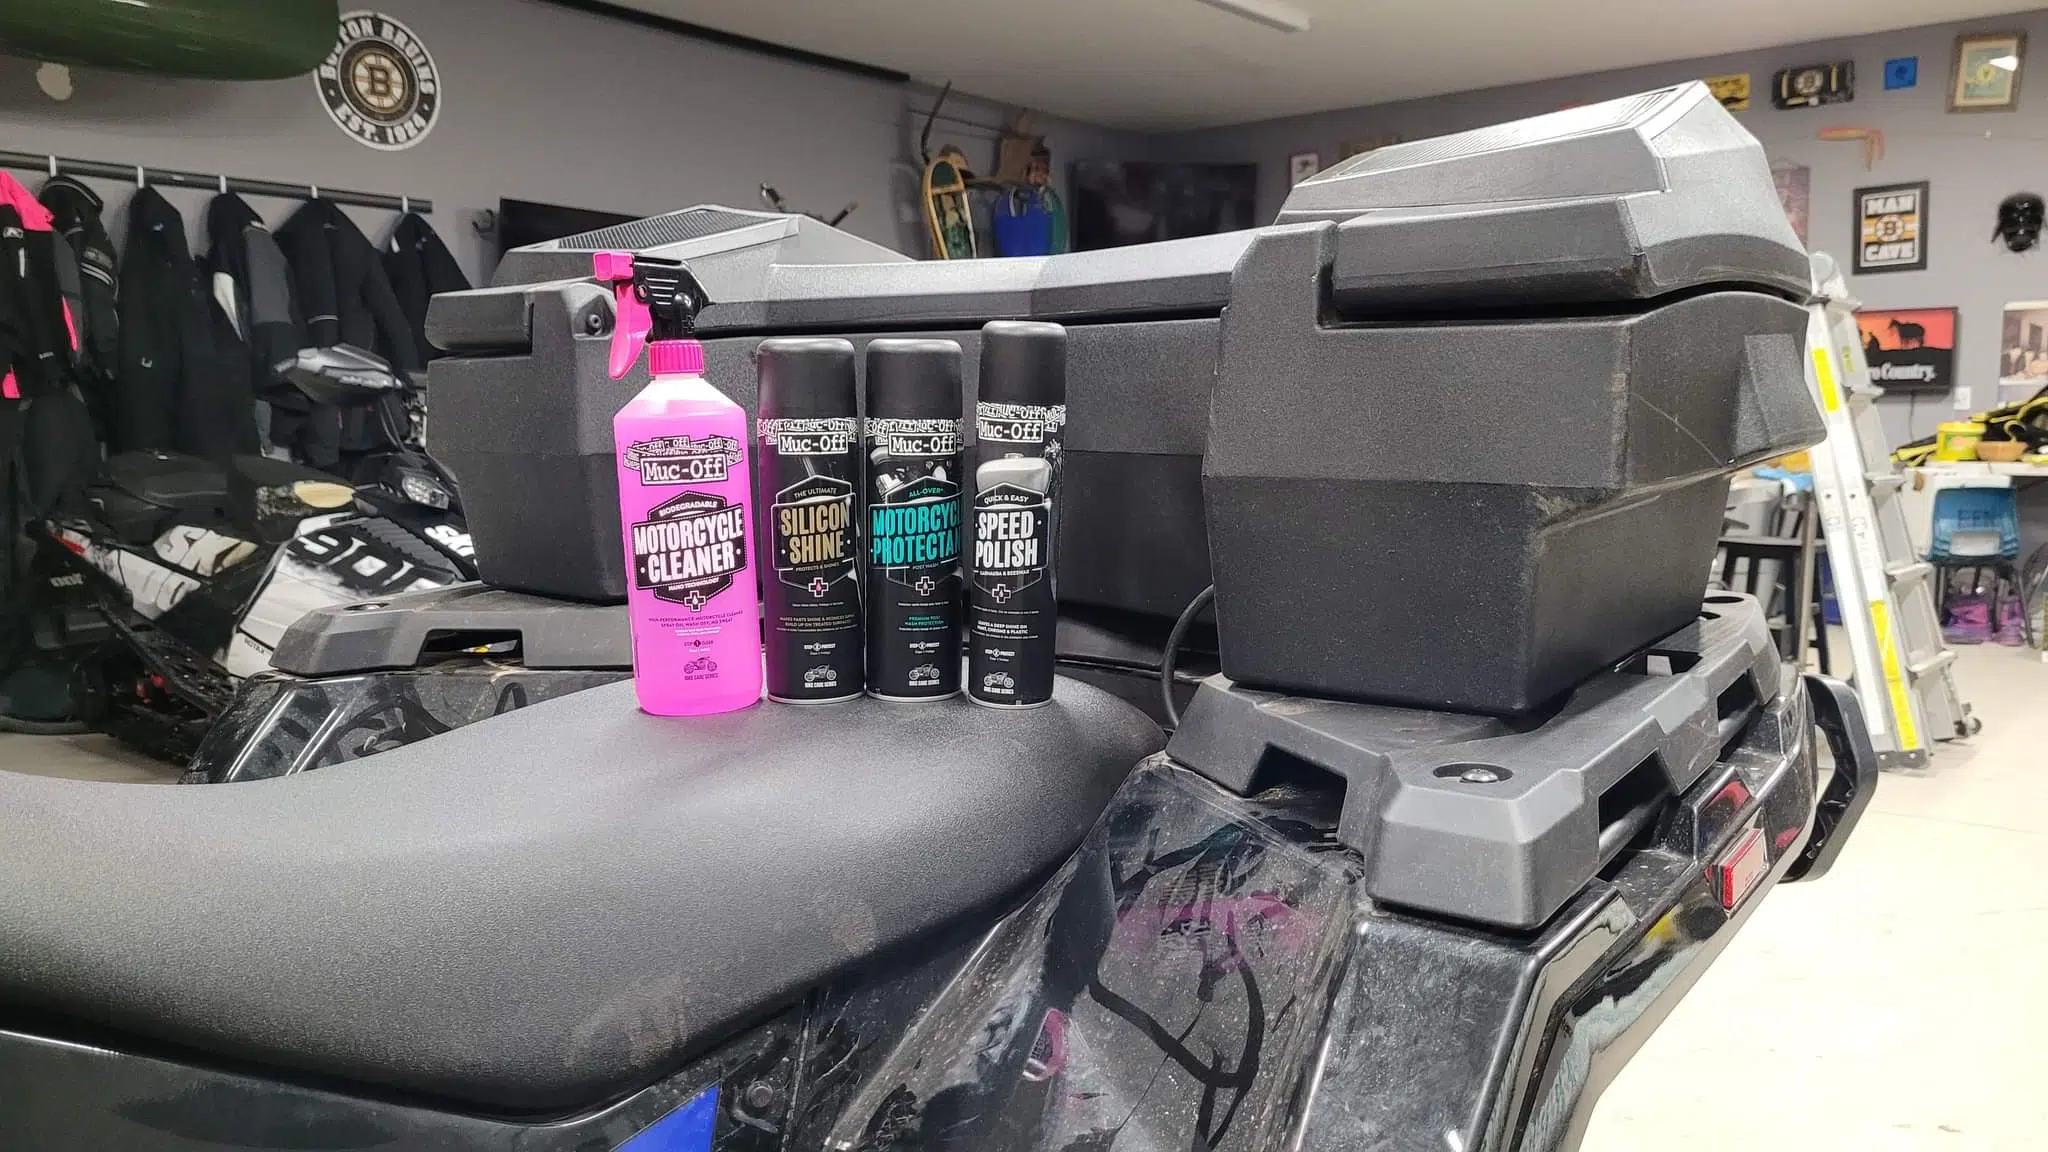 Let's talk about the Muc-Off products